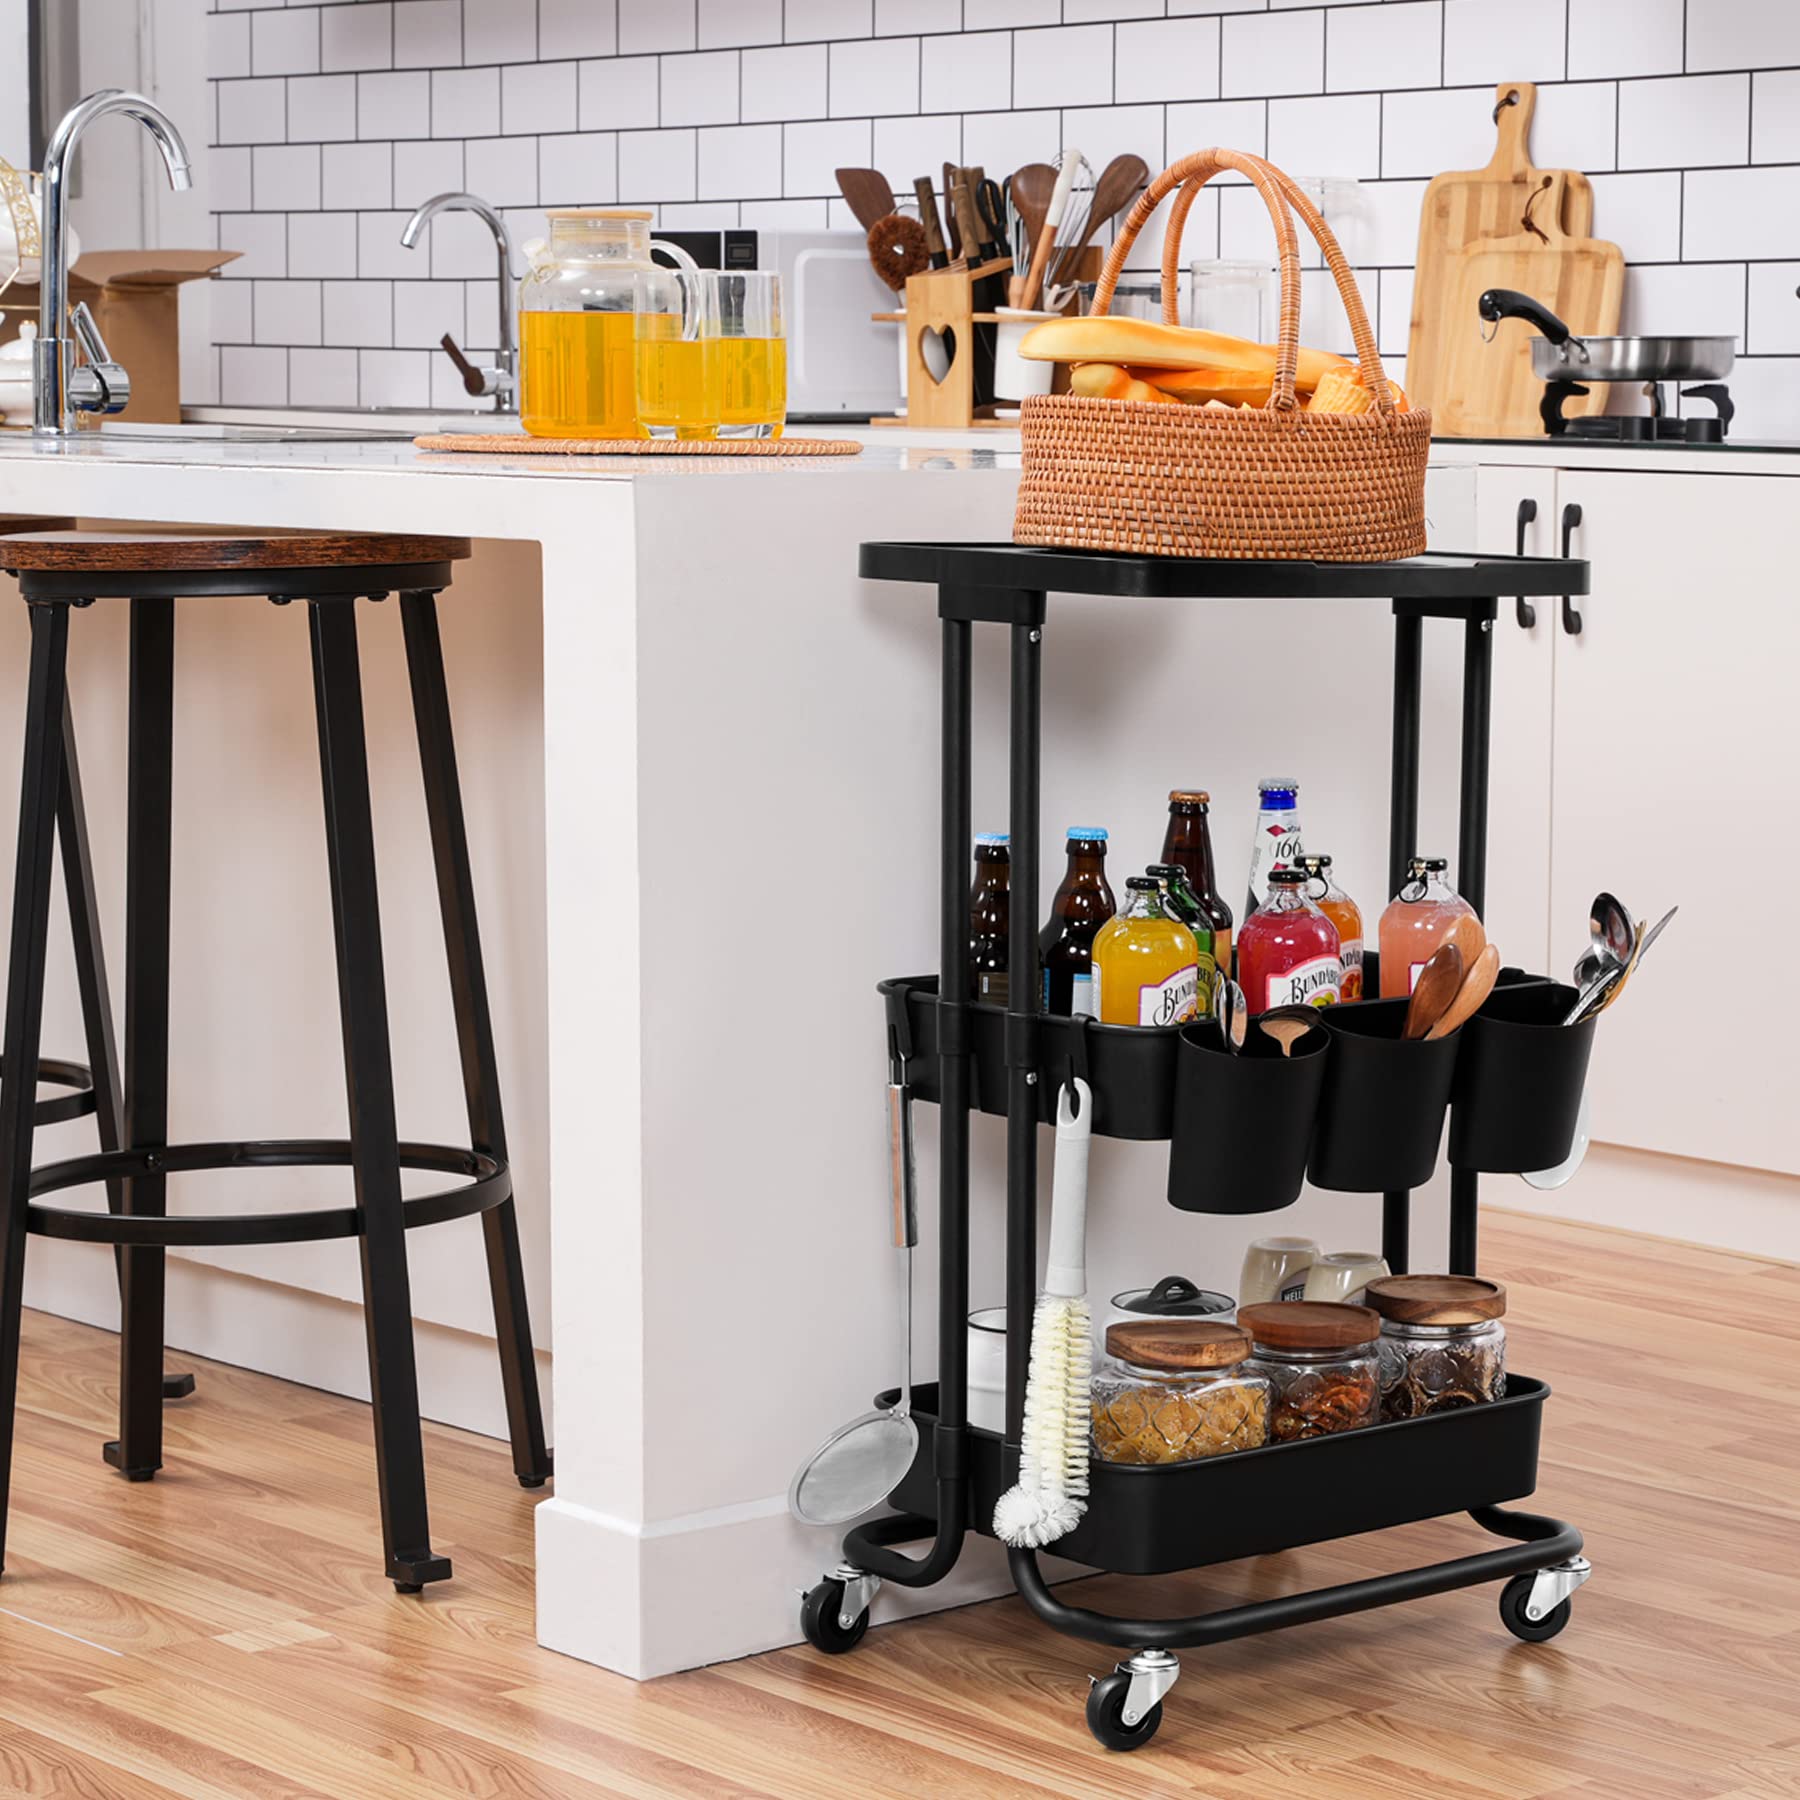 3 Tier Rolling Cart Table Top, Rolling Metal Organization Cart with 3 Cups & 3 Hooks, Multifunctional Storage Shelves with Wheels for Kitchen Living Room Office,Black